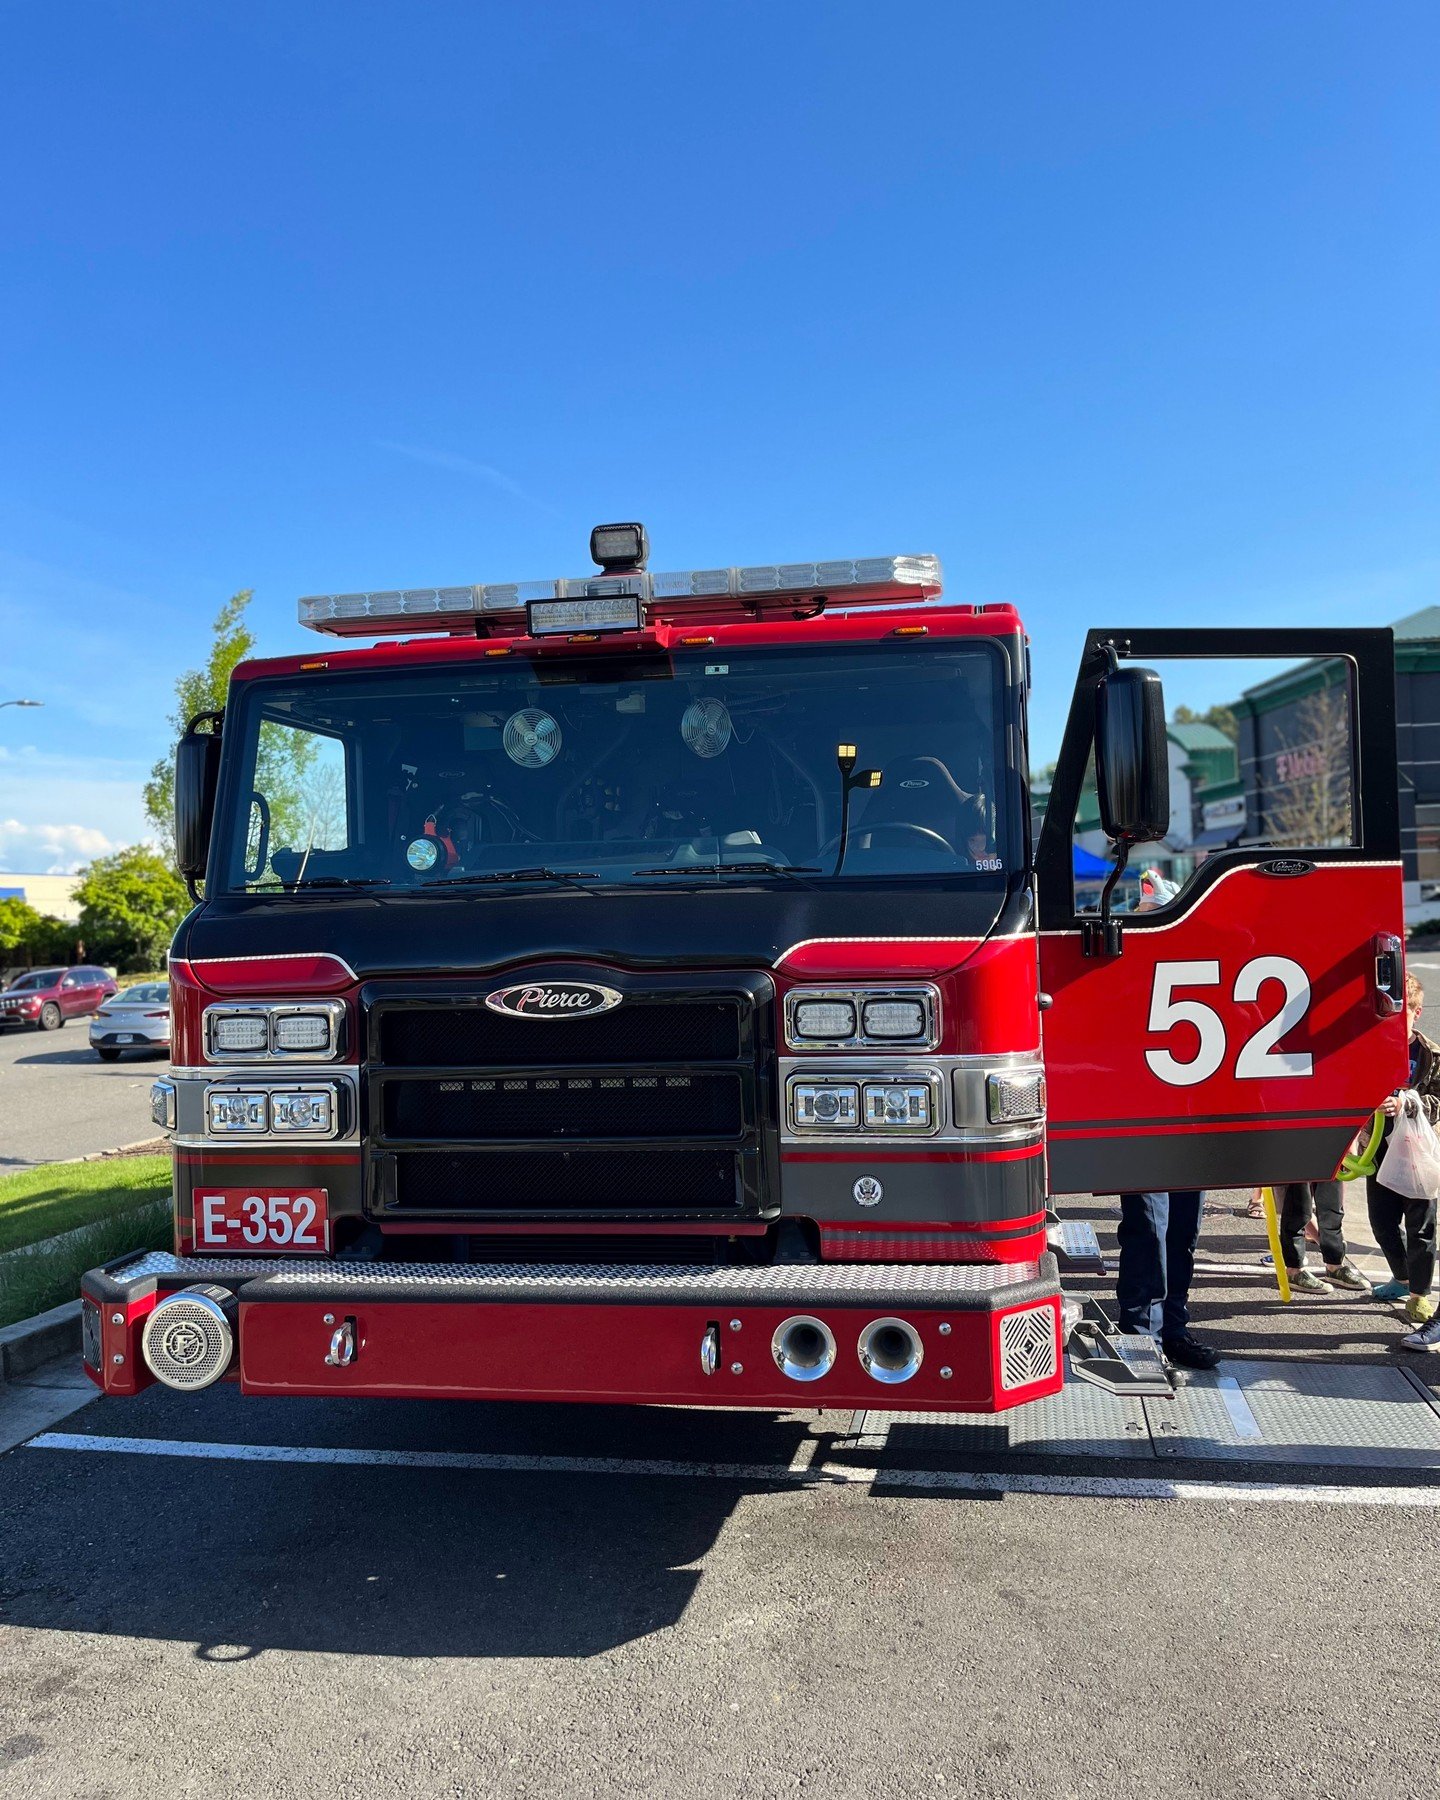 🚒 Hero Night 2024
🚔 May 2, 4-7pm

🚑 The countdown is on for Hero Night! And theres still space for you to join us! Bring your friends, and join us to meet your heroes. We are so excited to have Tukwila Police, Puget Sound Fire, and Tri-Med Ambulan